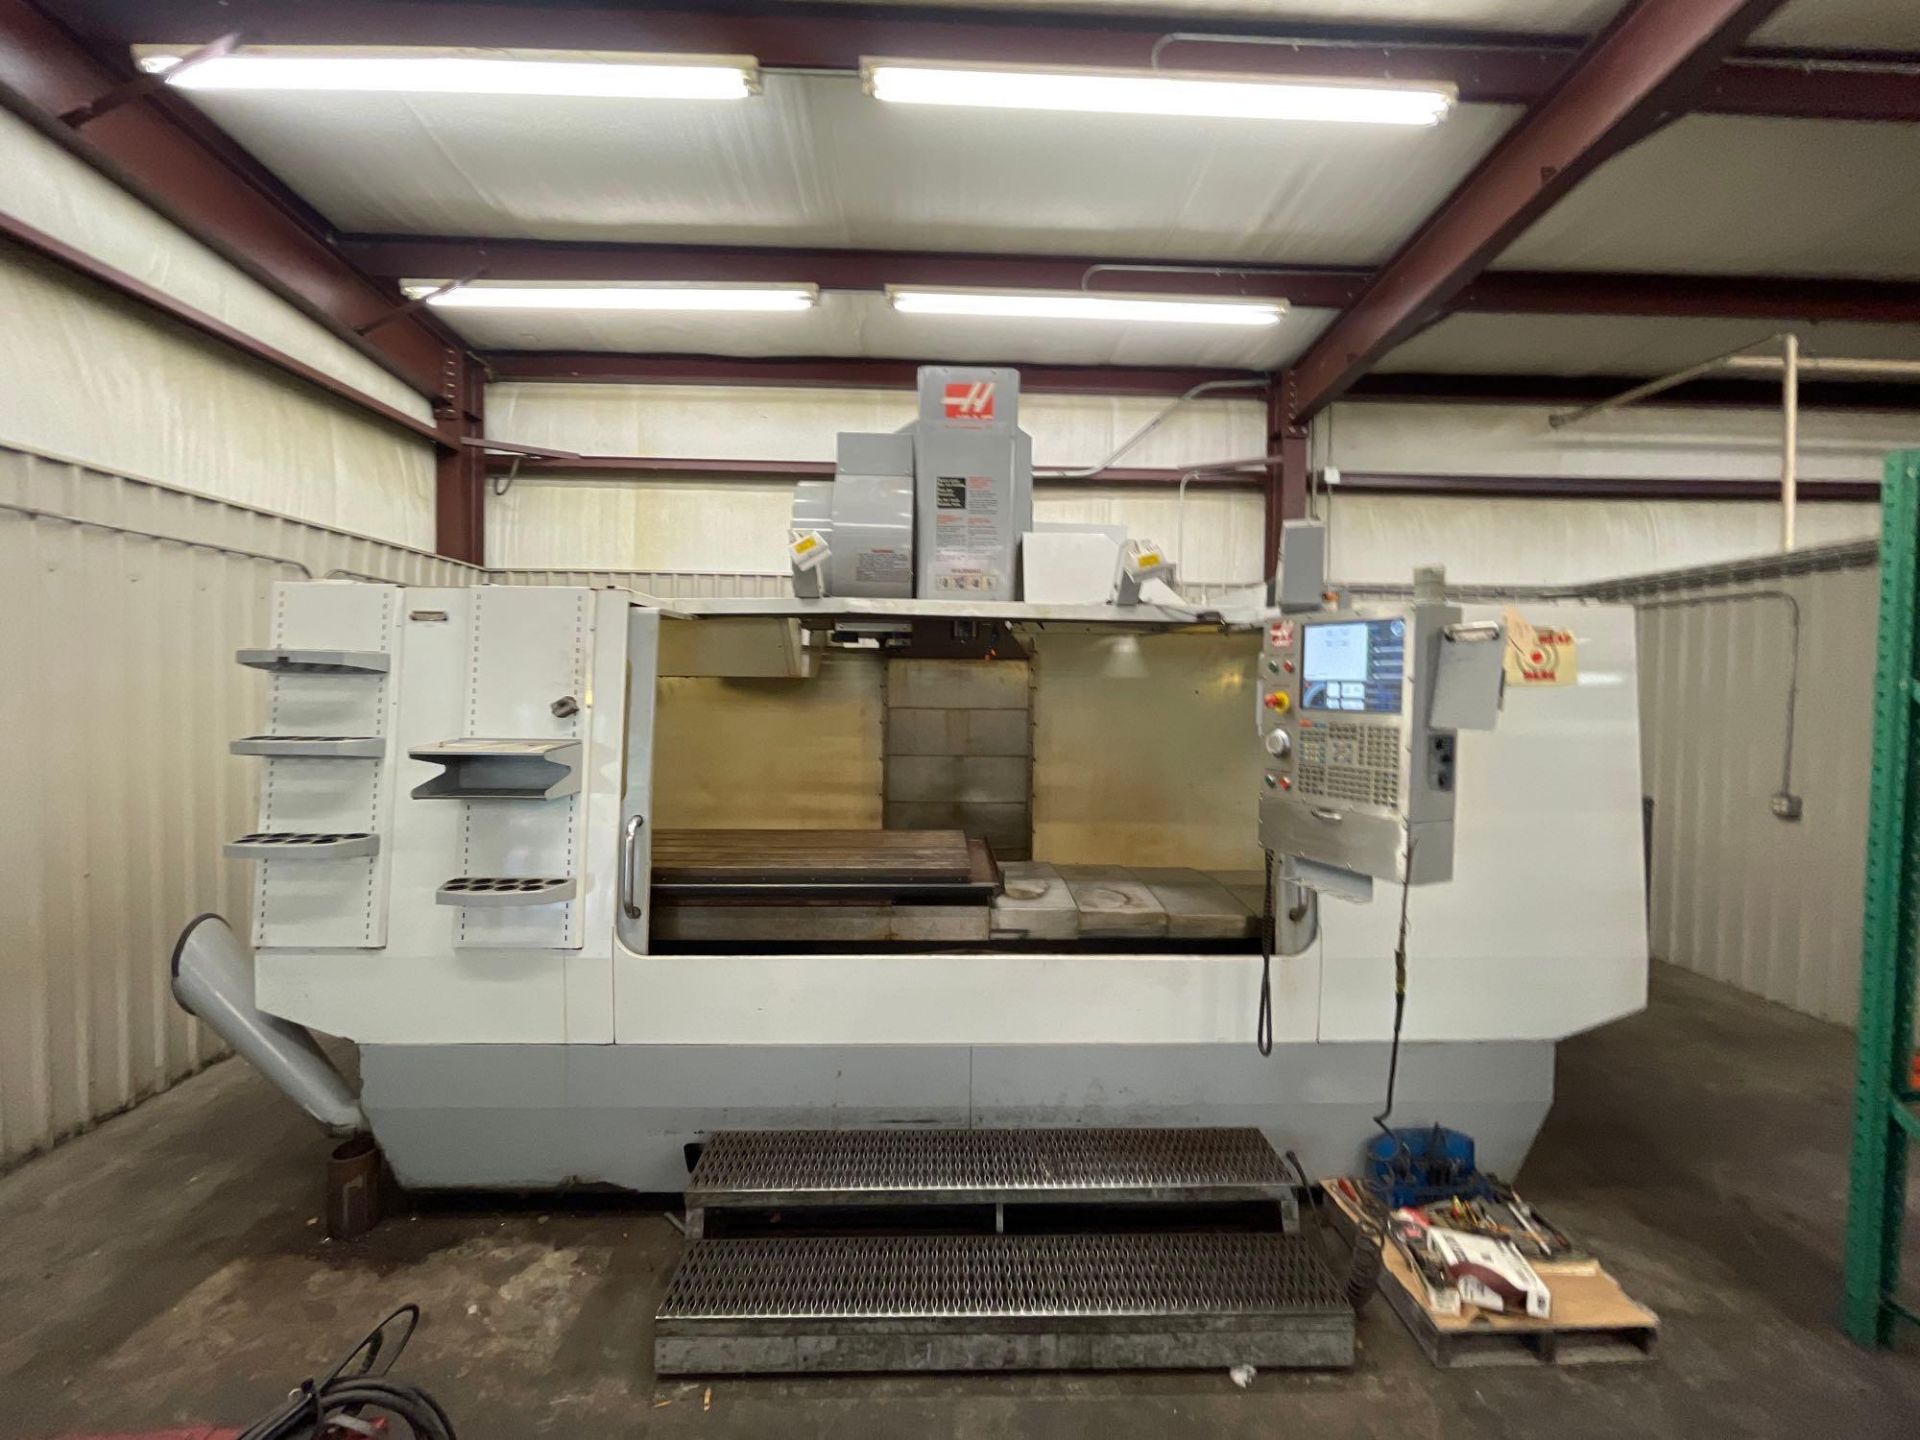 2006, Haas VF-7B/ 40 CNC Vertical Machining Center - Image 2 of 12